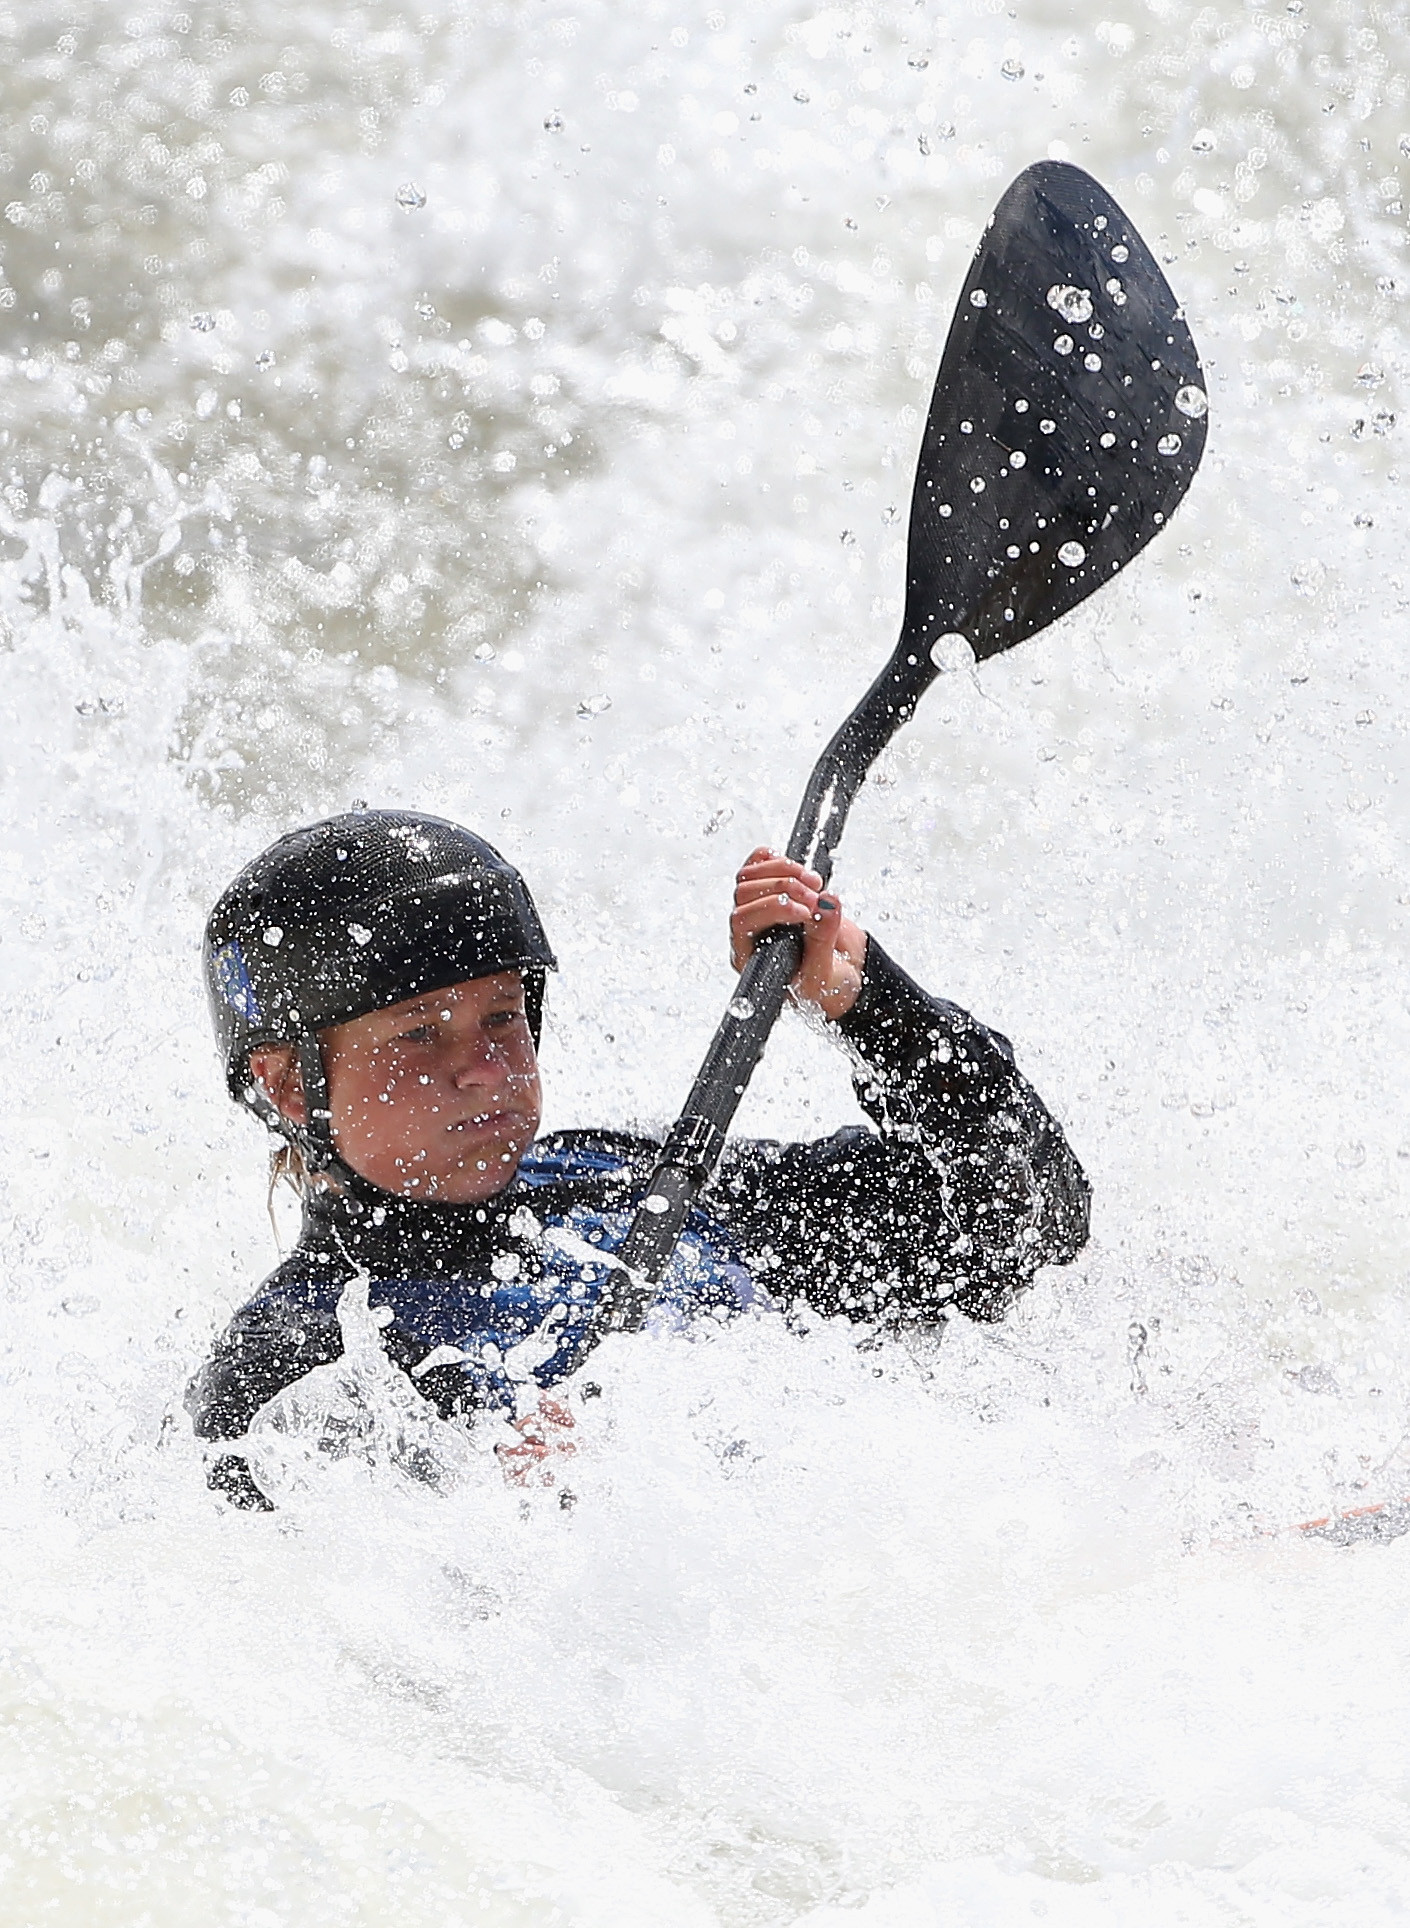 Sage Donnelly pulled off an upset to win the women's kayak surface gold medal ©Getty Images